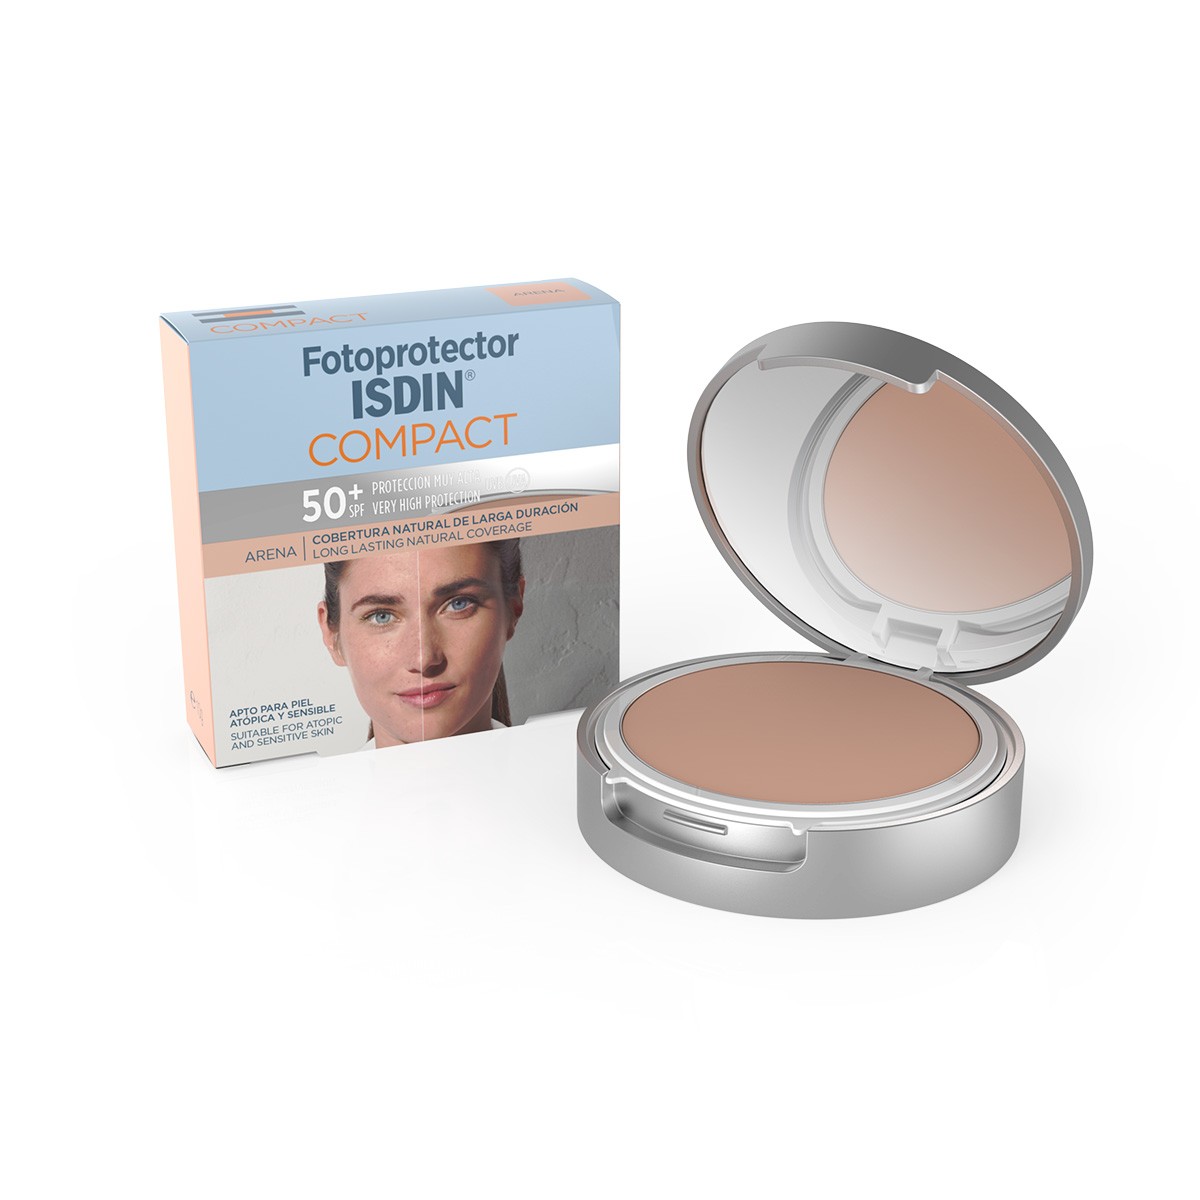 Isdin fotoprotector compact 50+ maquillaje color arena 10g